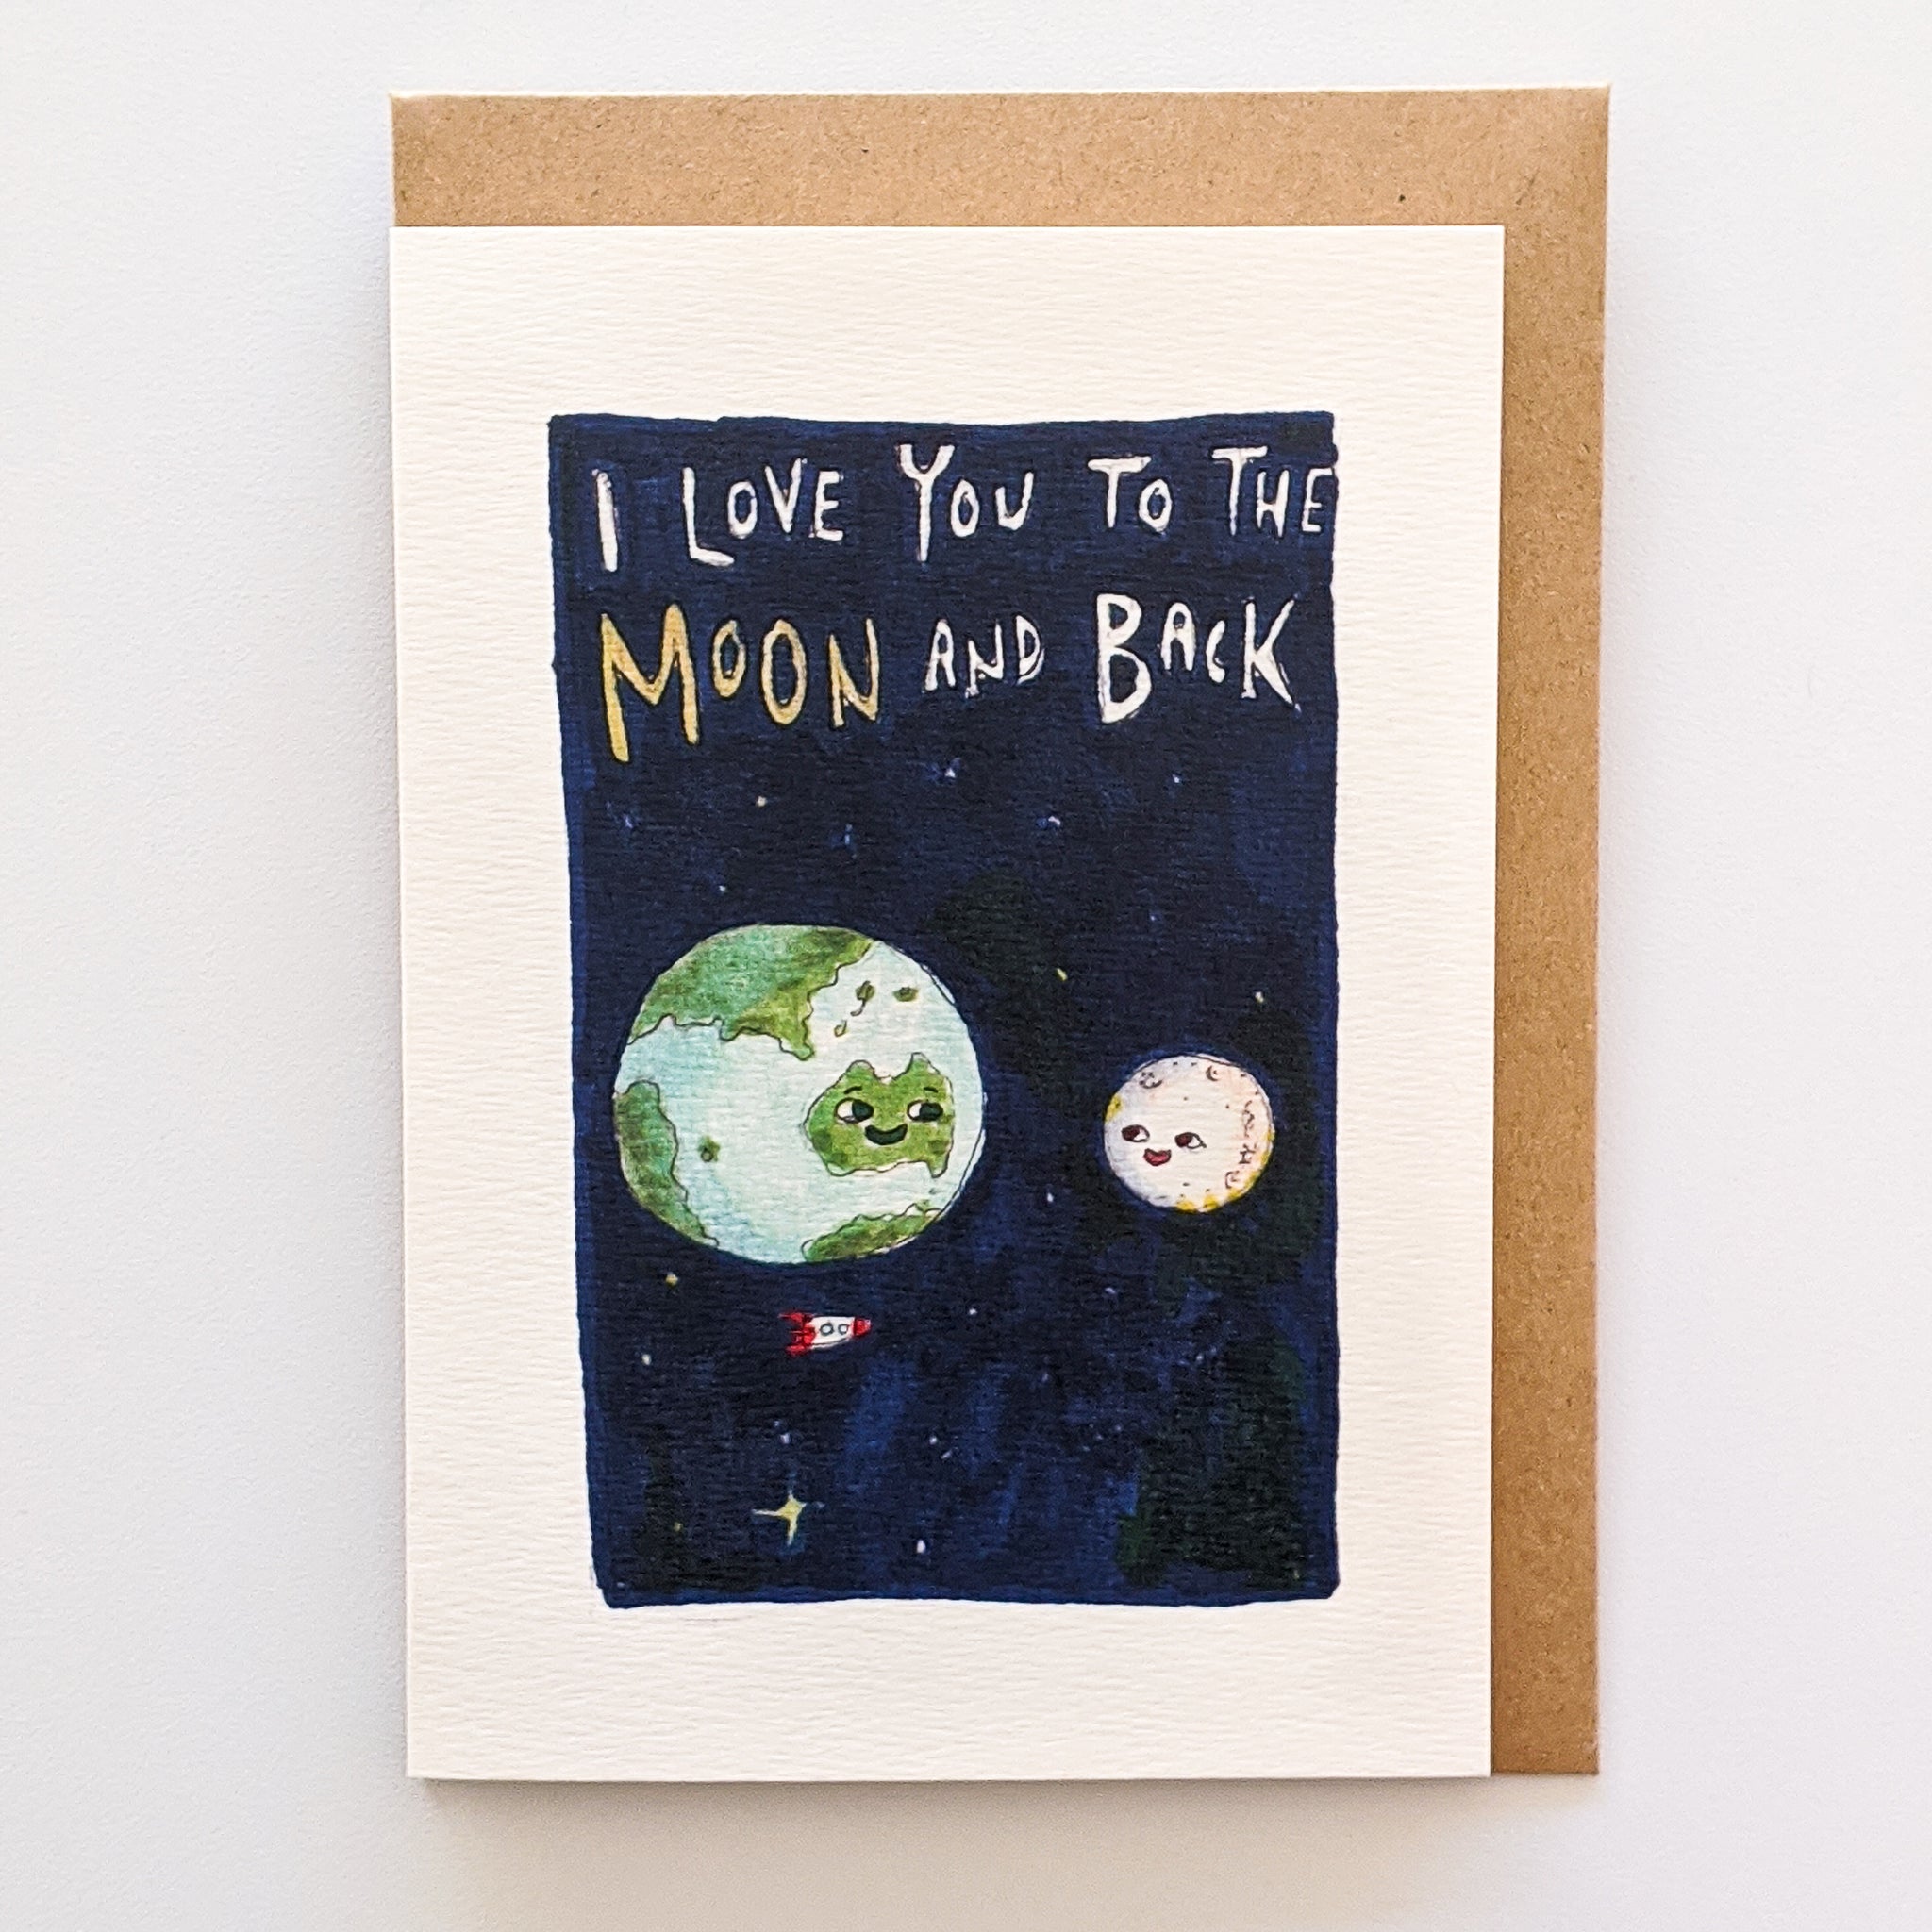 I Love You To The Moon And Back | unique card | lovely card | hand-made card | card